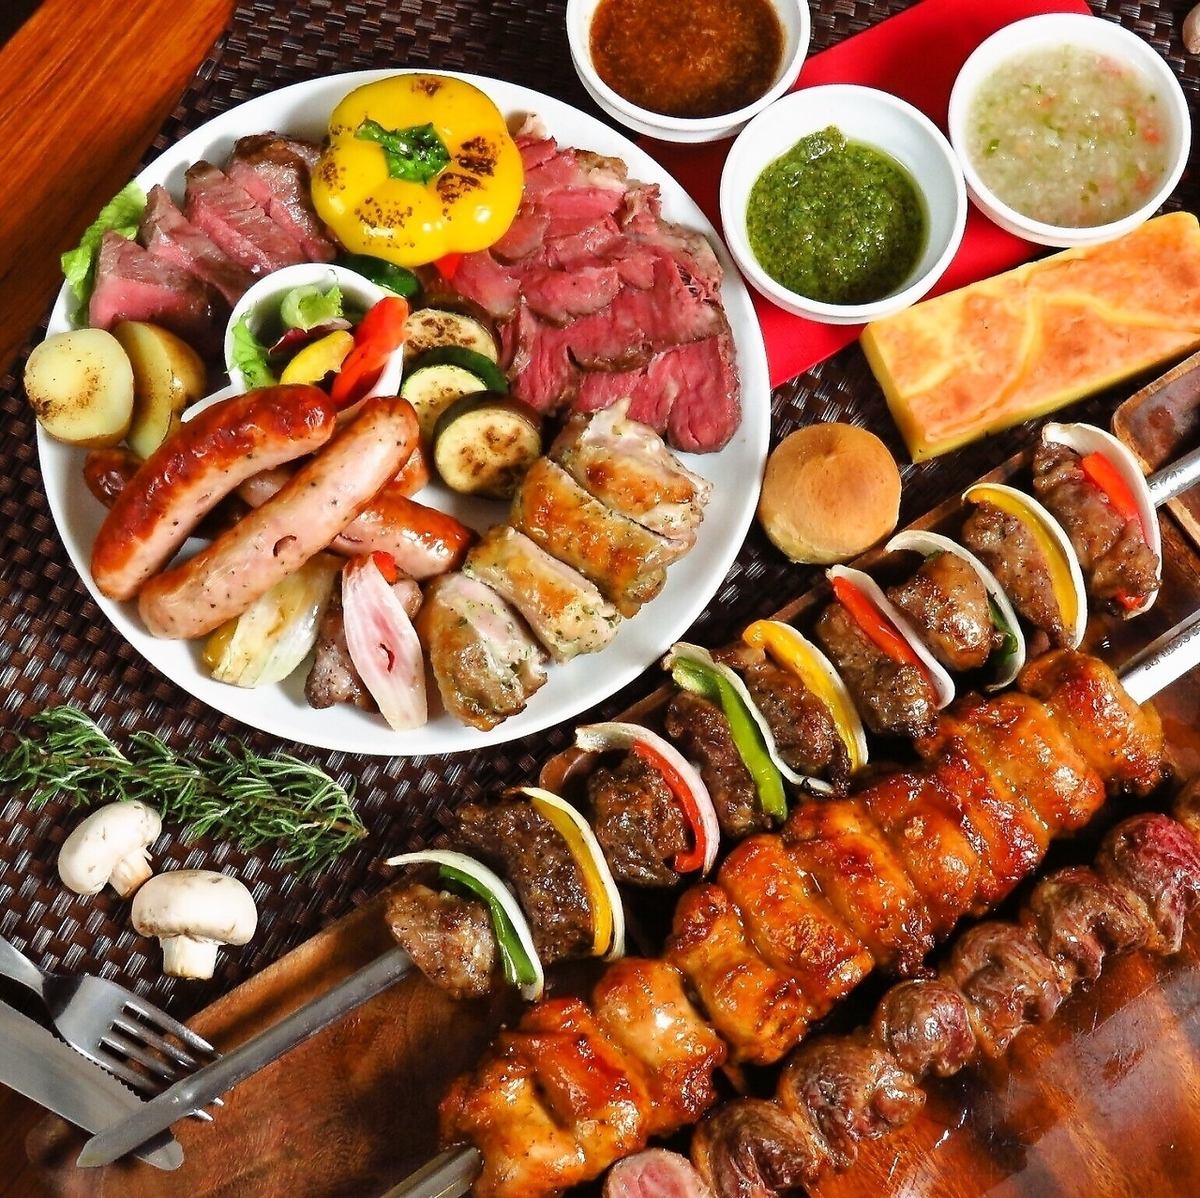 ★All-you-can-eat 20 types of Churrasco! Enjoy the hearty chunks of meat♪